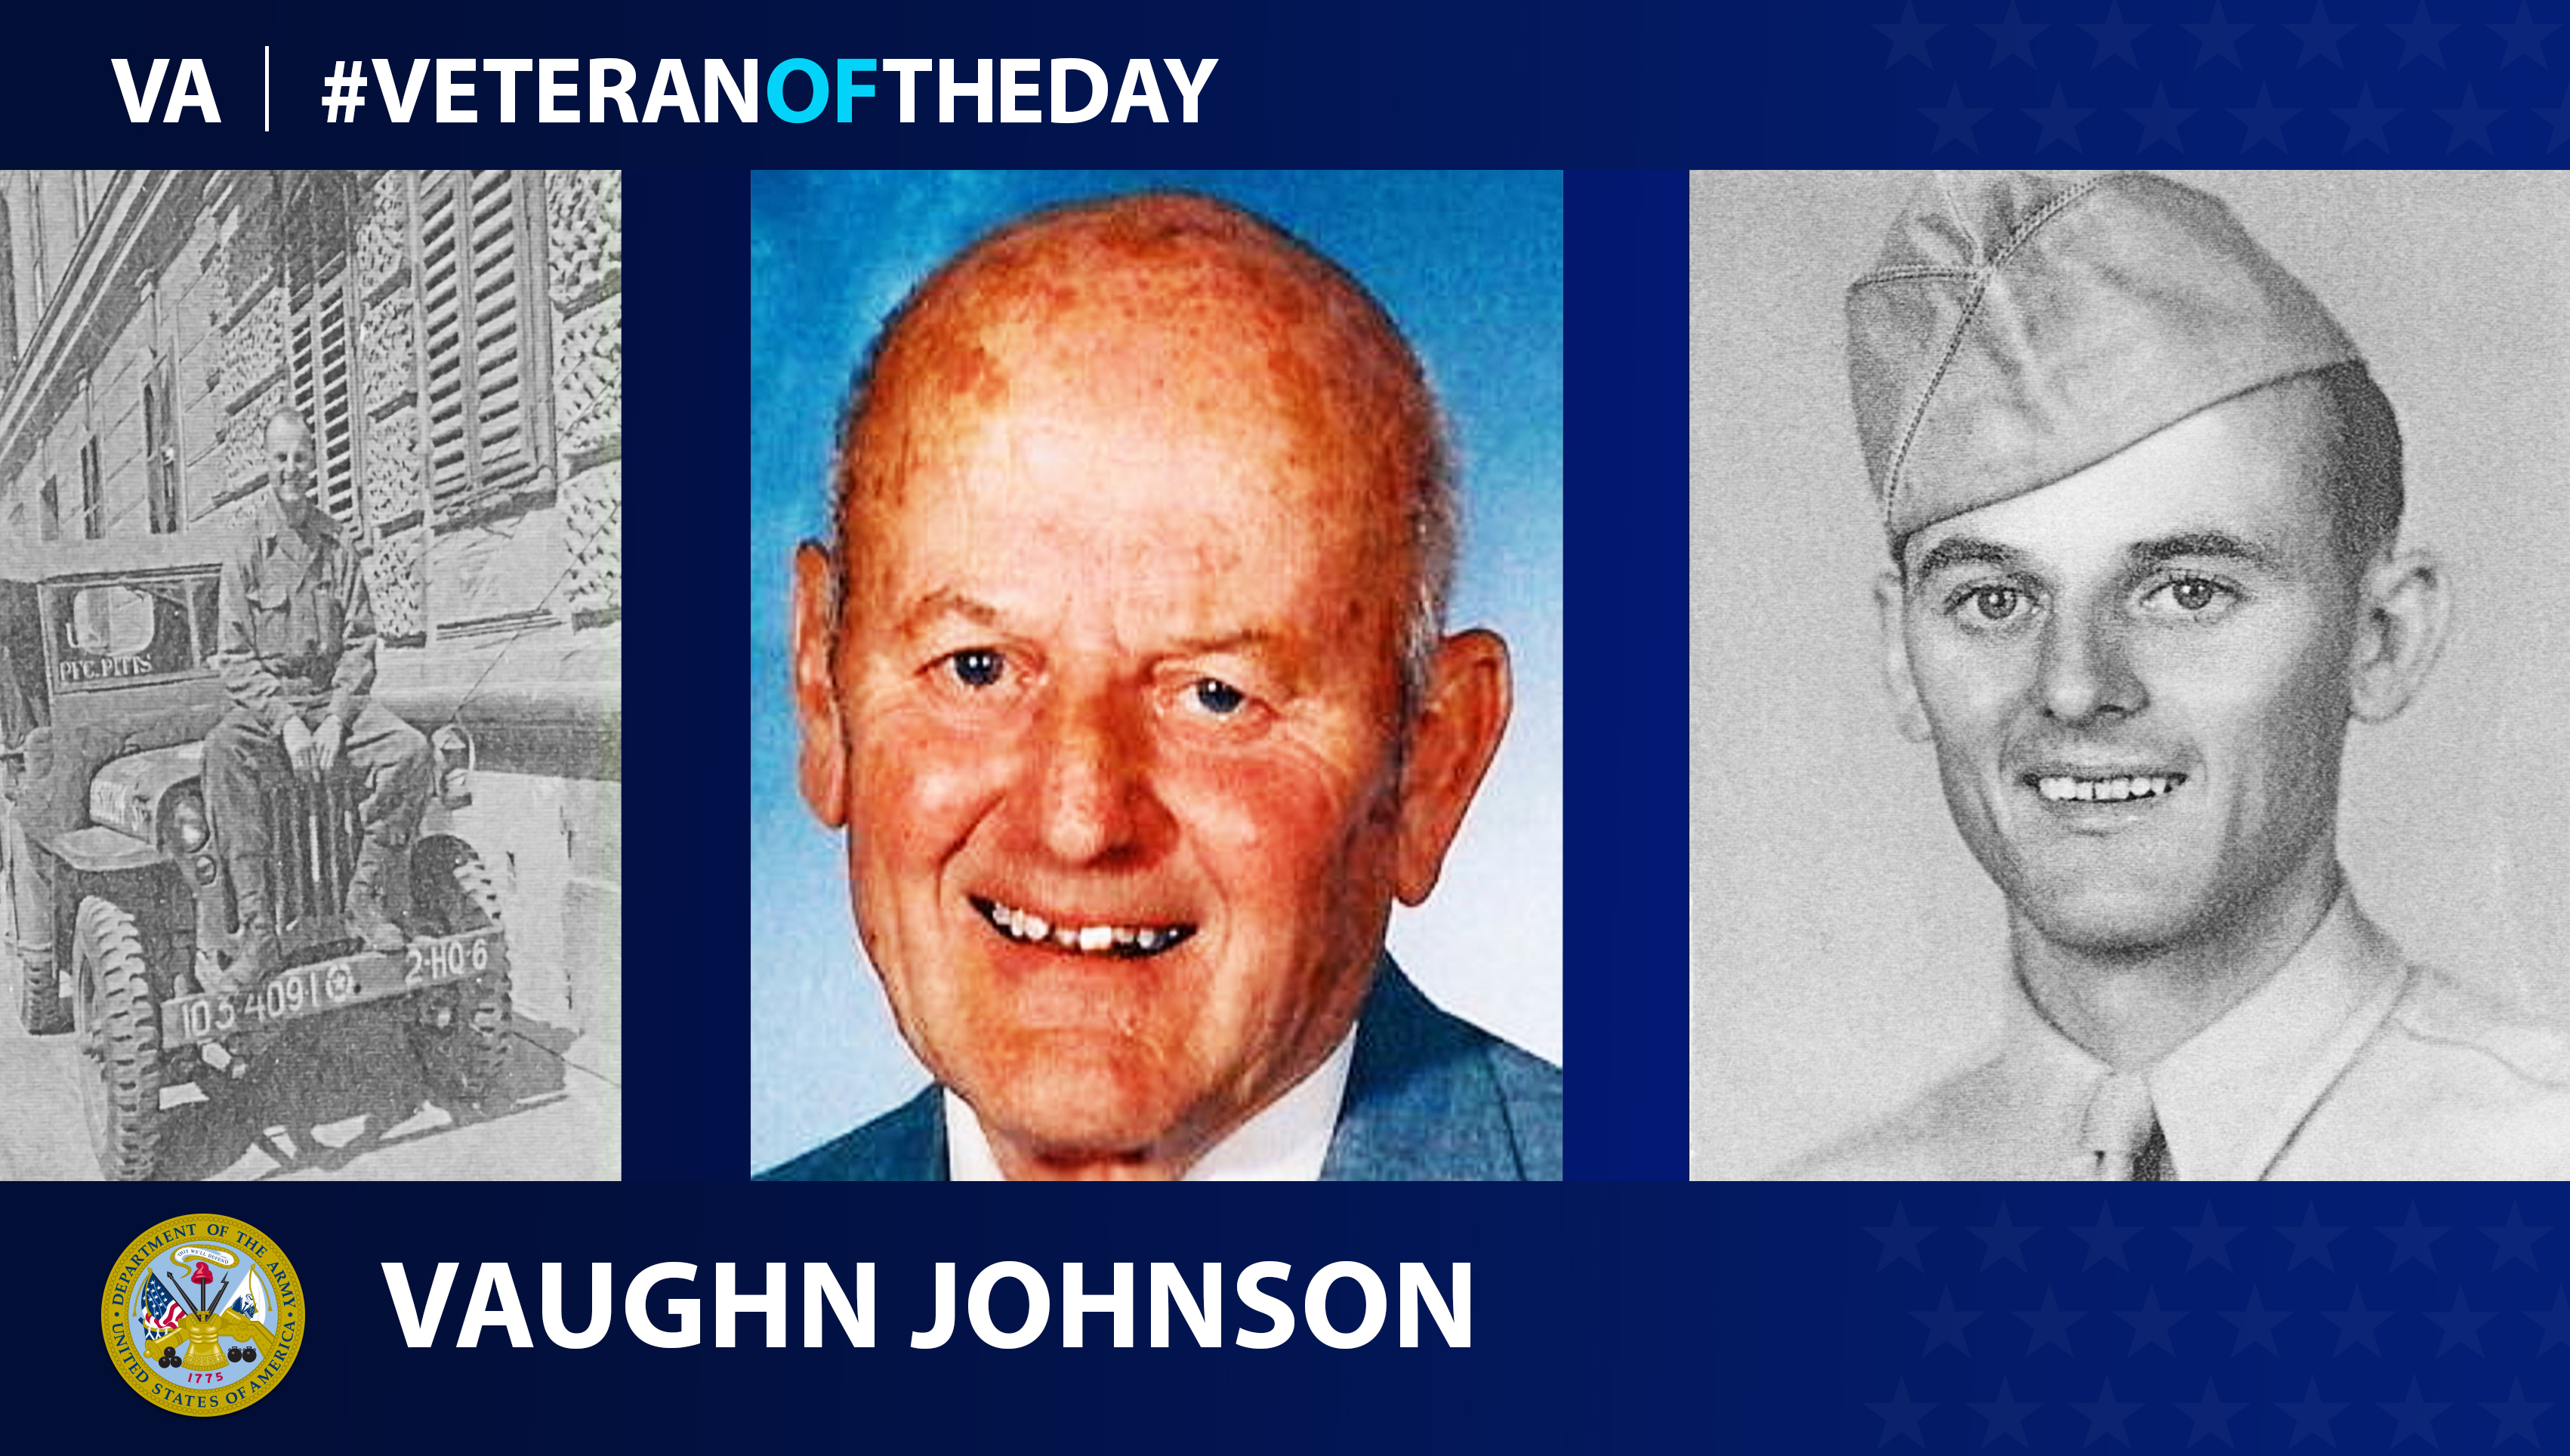 Army Veteran Vaughn A. Johnson is today's Veteran of the Day.